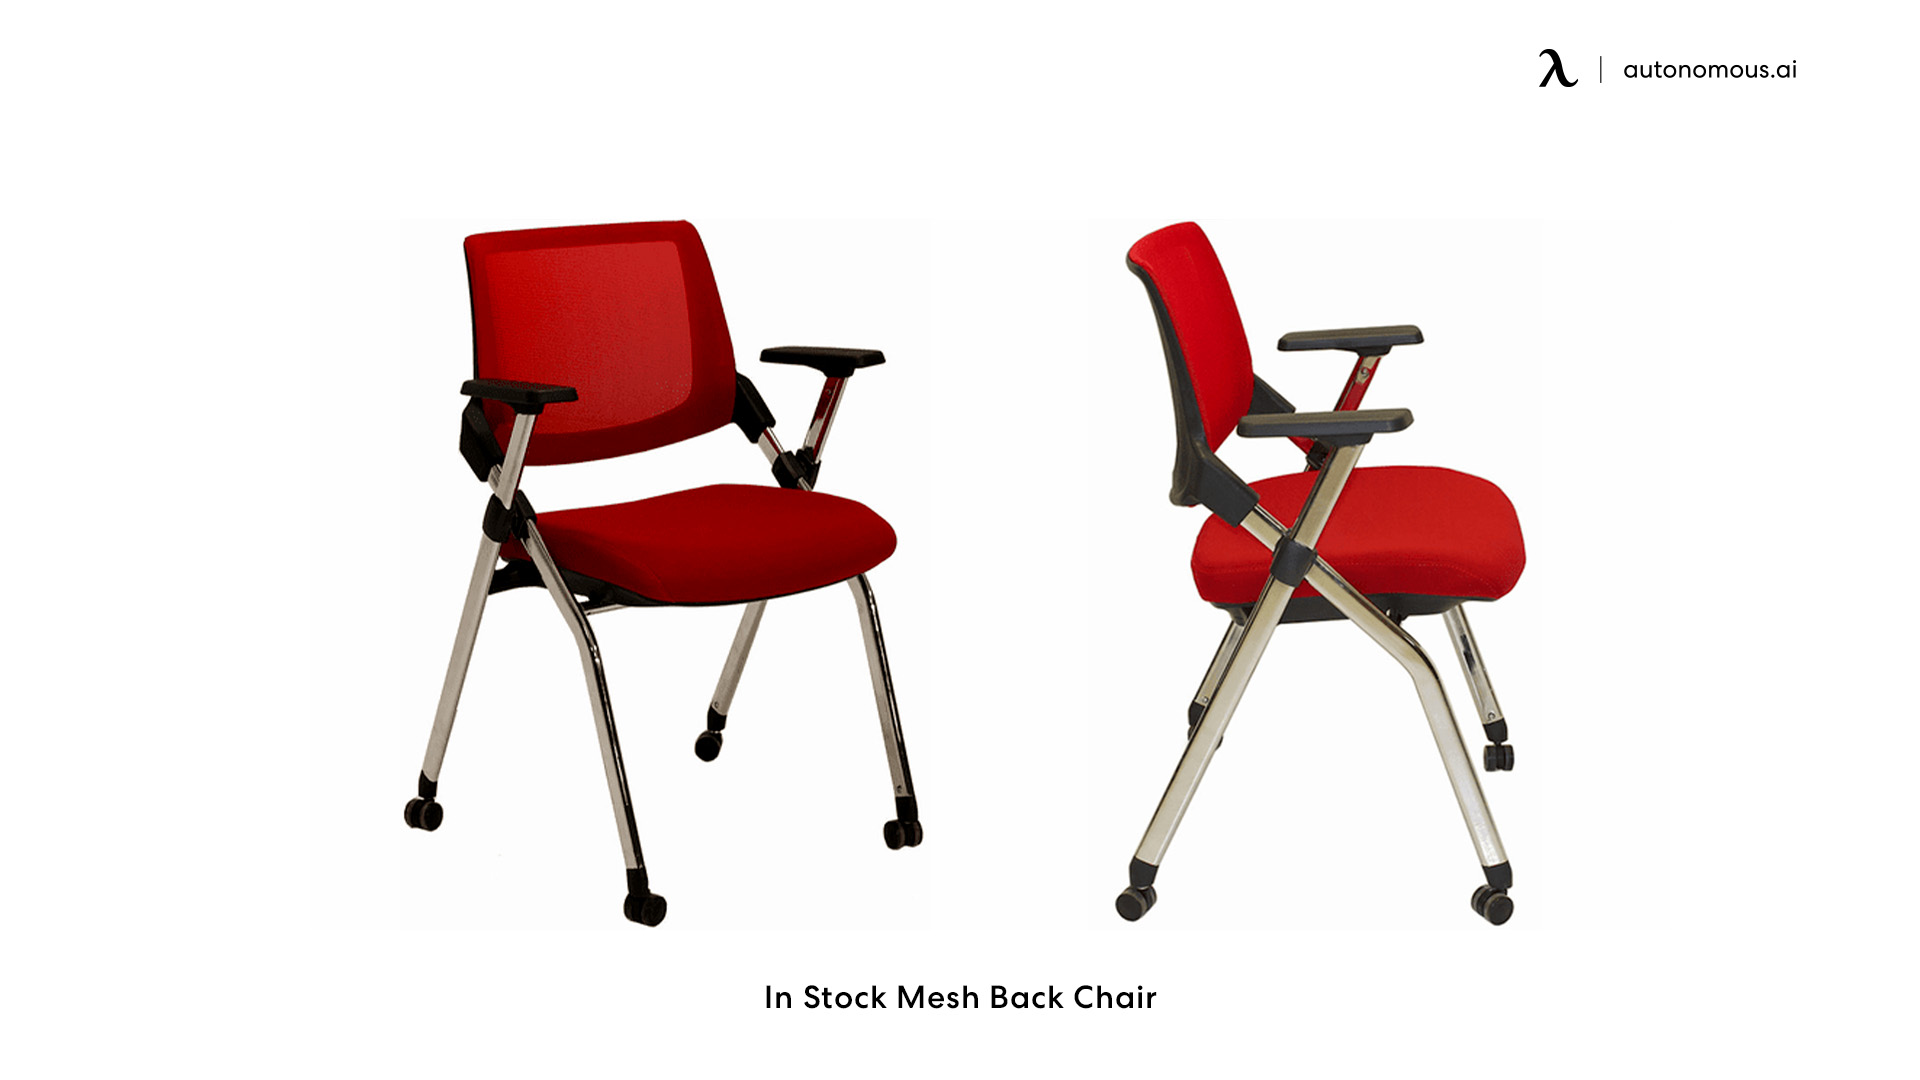 In Stock Mesh Back Chair